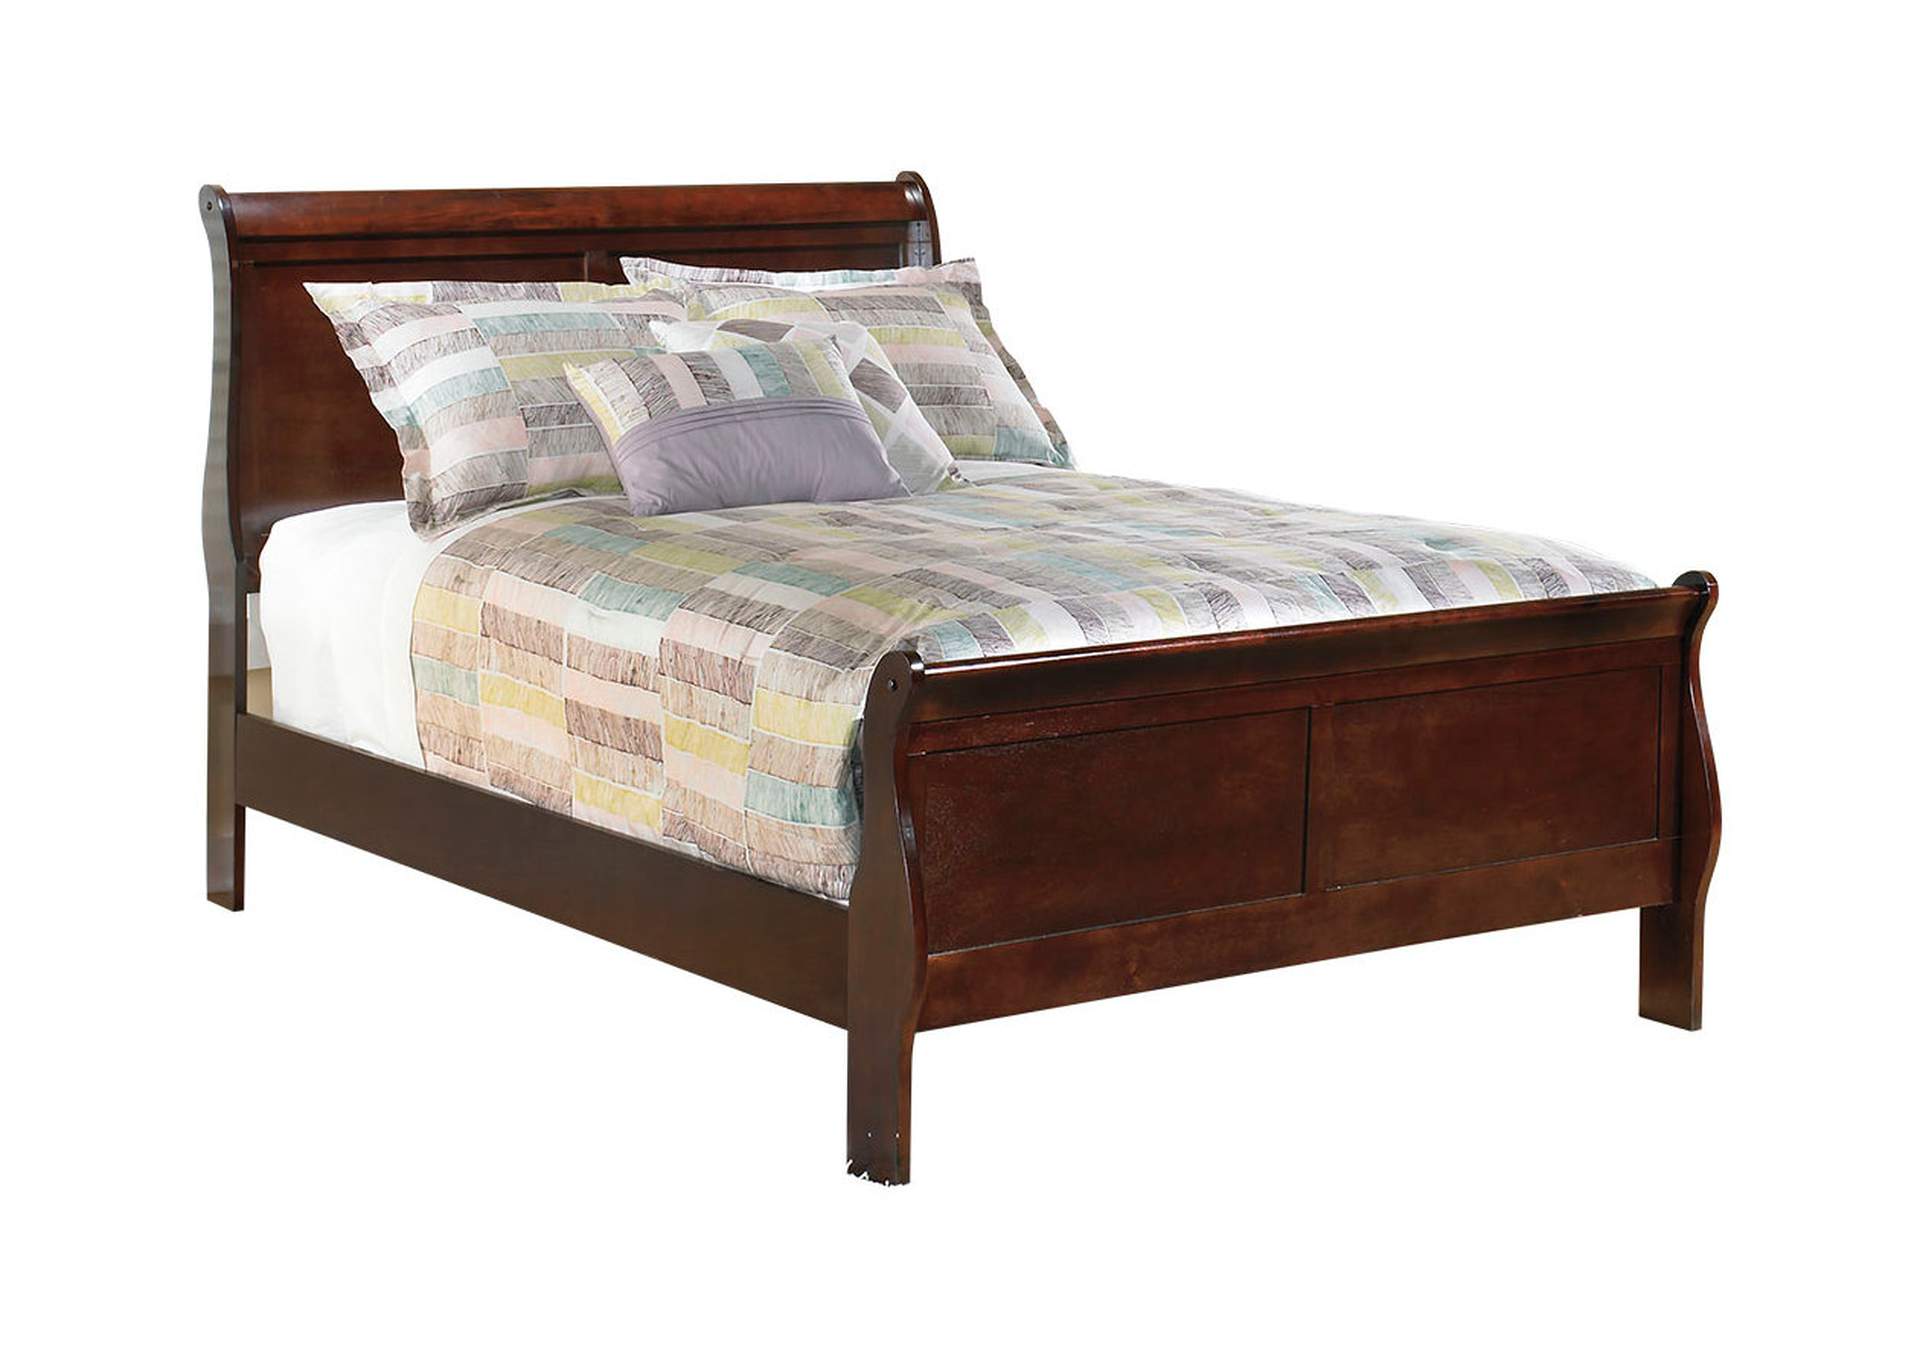 Alisdair Full Sleigh Bed with Mirrored Dresser and Chest,Signature Design By Ashley